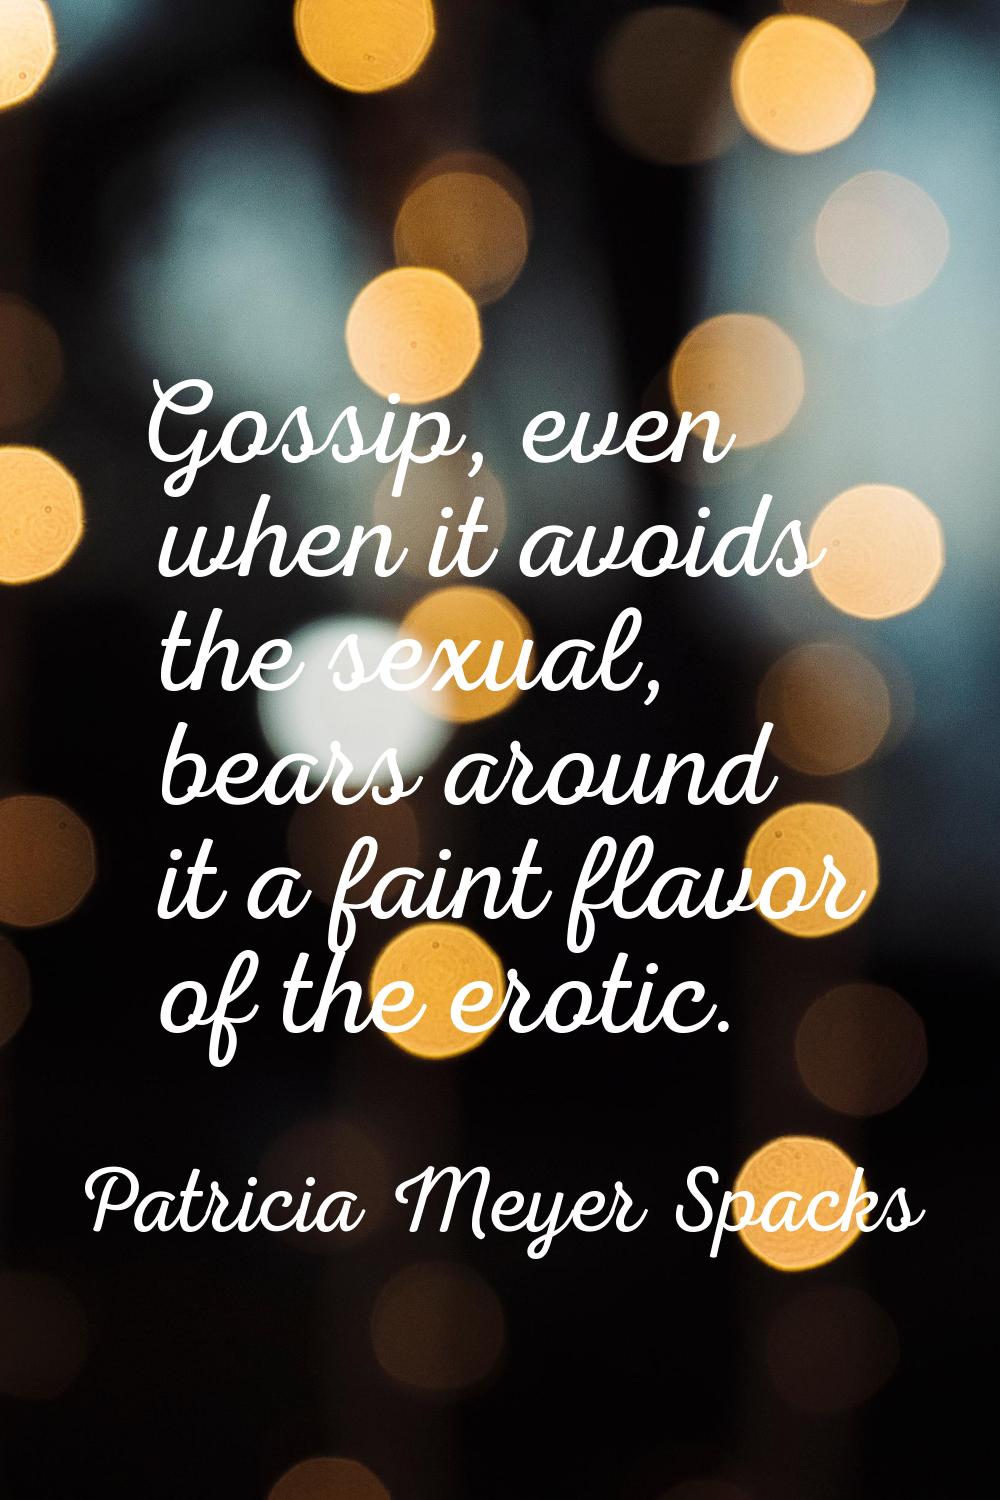 Gossip, even when it avoids the sexual, bears around it a faint flavor of the erotic.